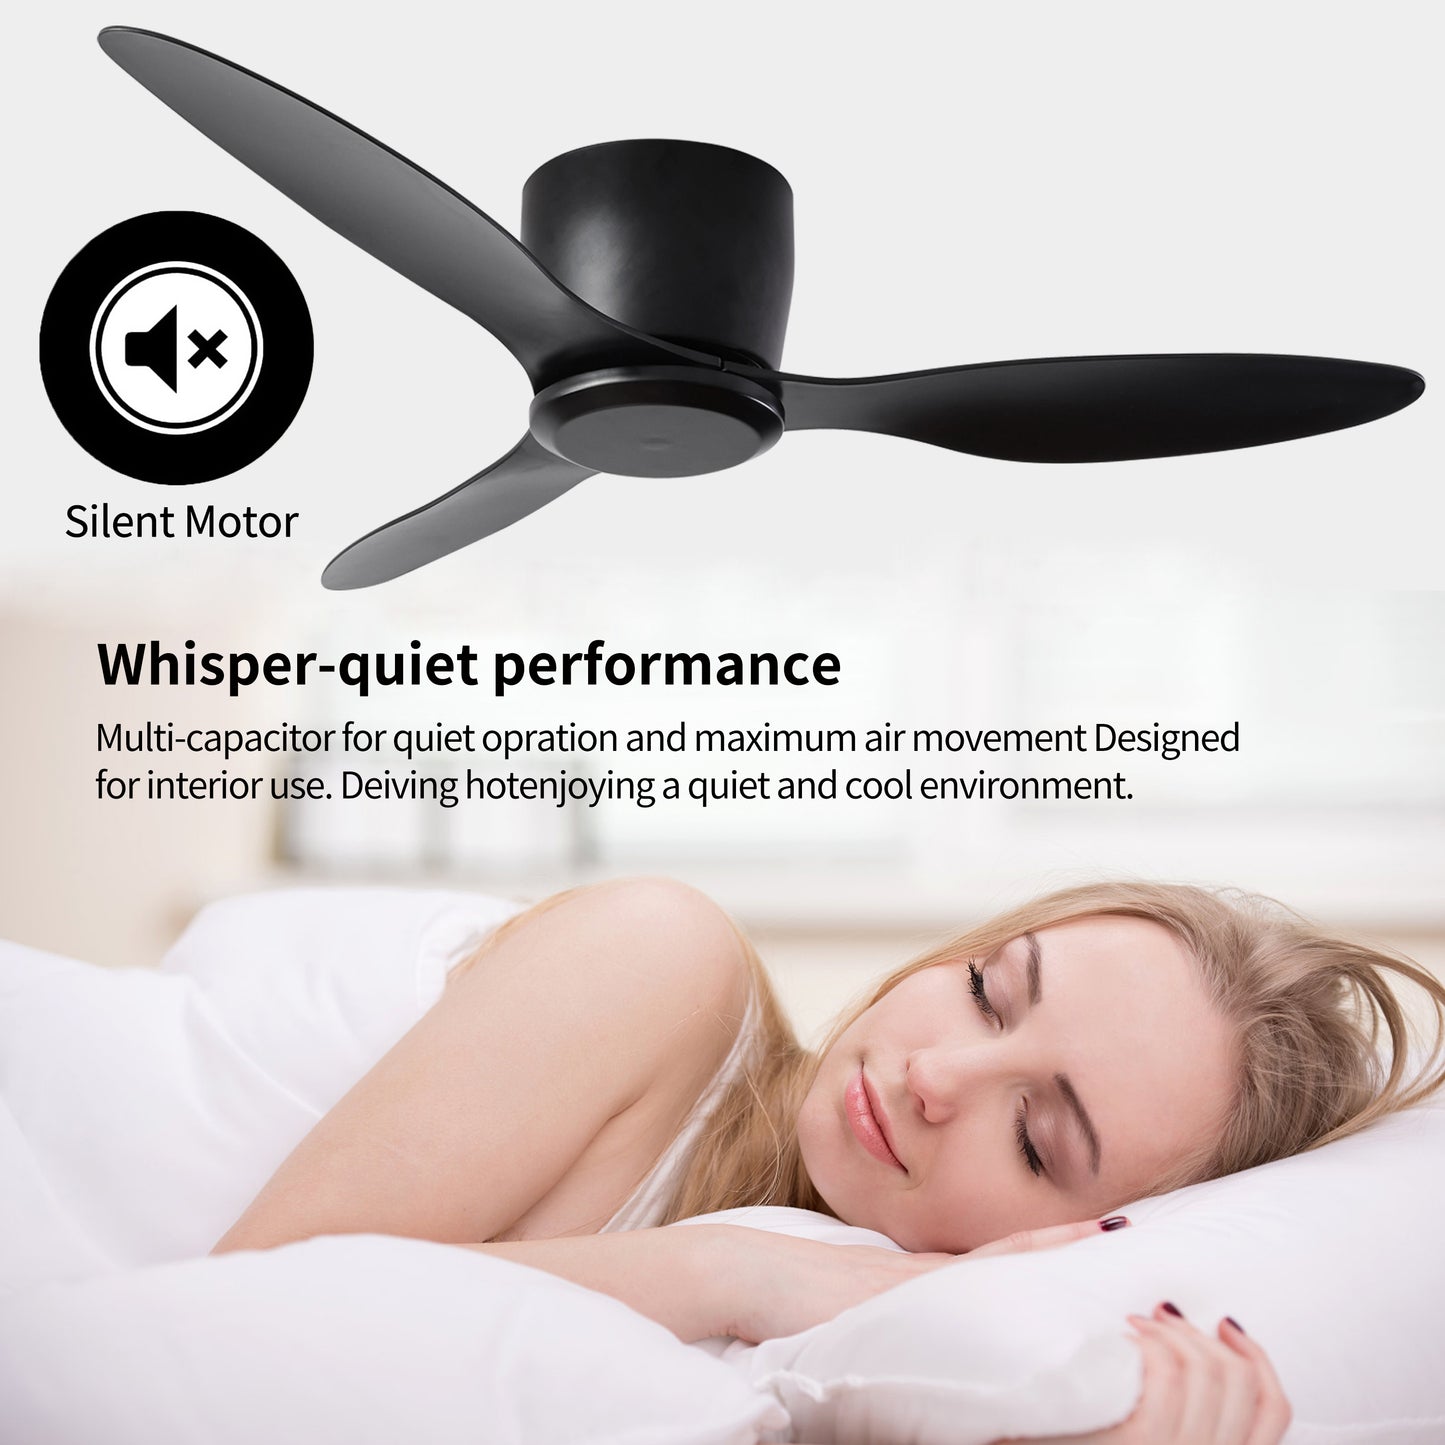 52 Black Ceiling Fan with Remote Control and Reversible DC Motor - Modern Design No Lights for Various Living Spaces